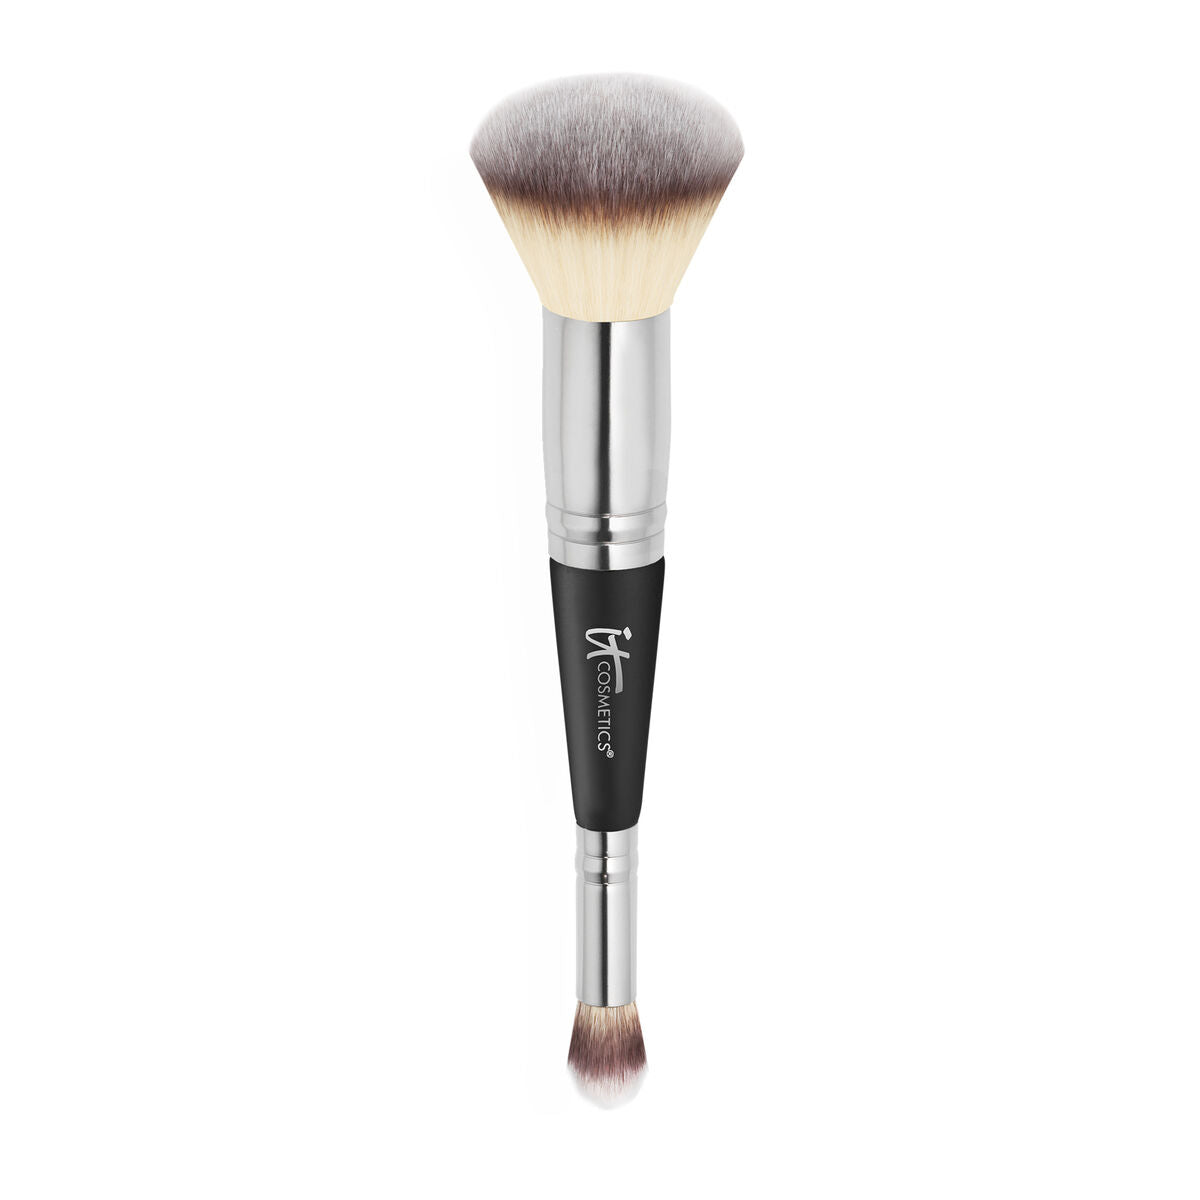 Make-up base brush It Cosmetics Heavenly Luxe (1 Unit)-0